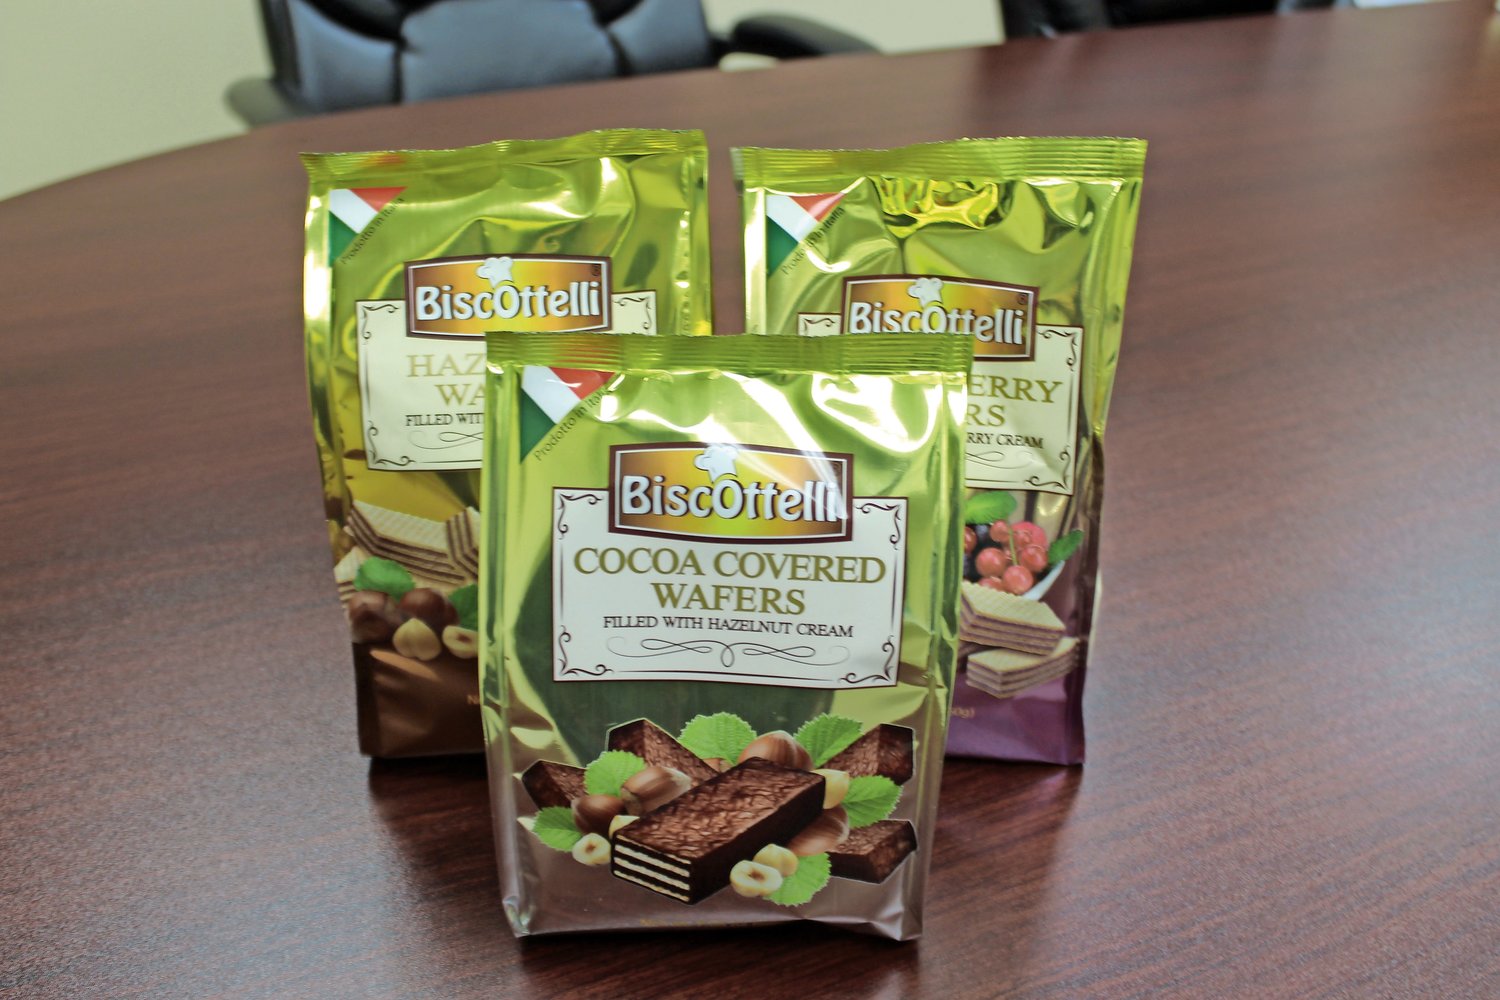 Biscotelli wafers come in cocoa, mixed berry and hazelnut flavors, just to name a few.